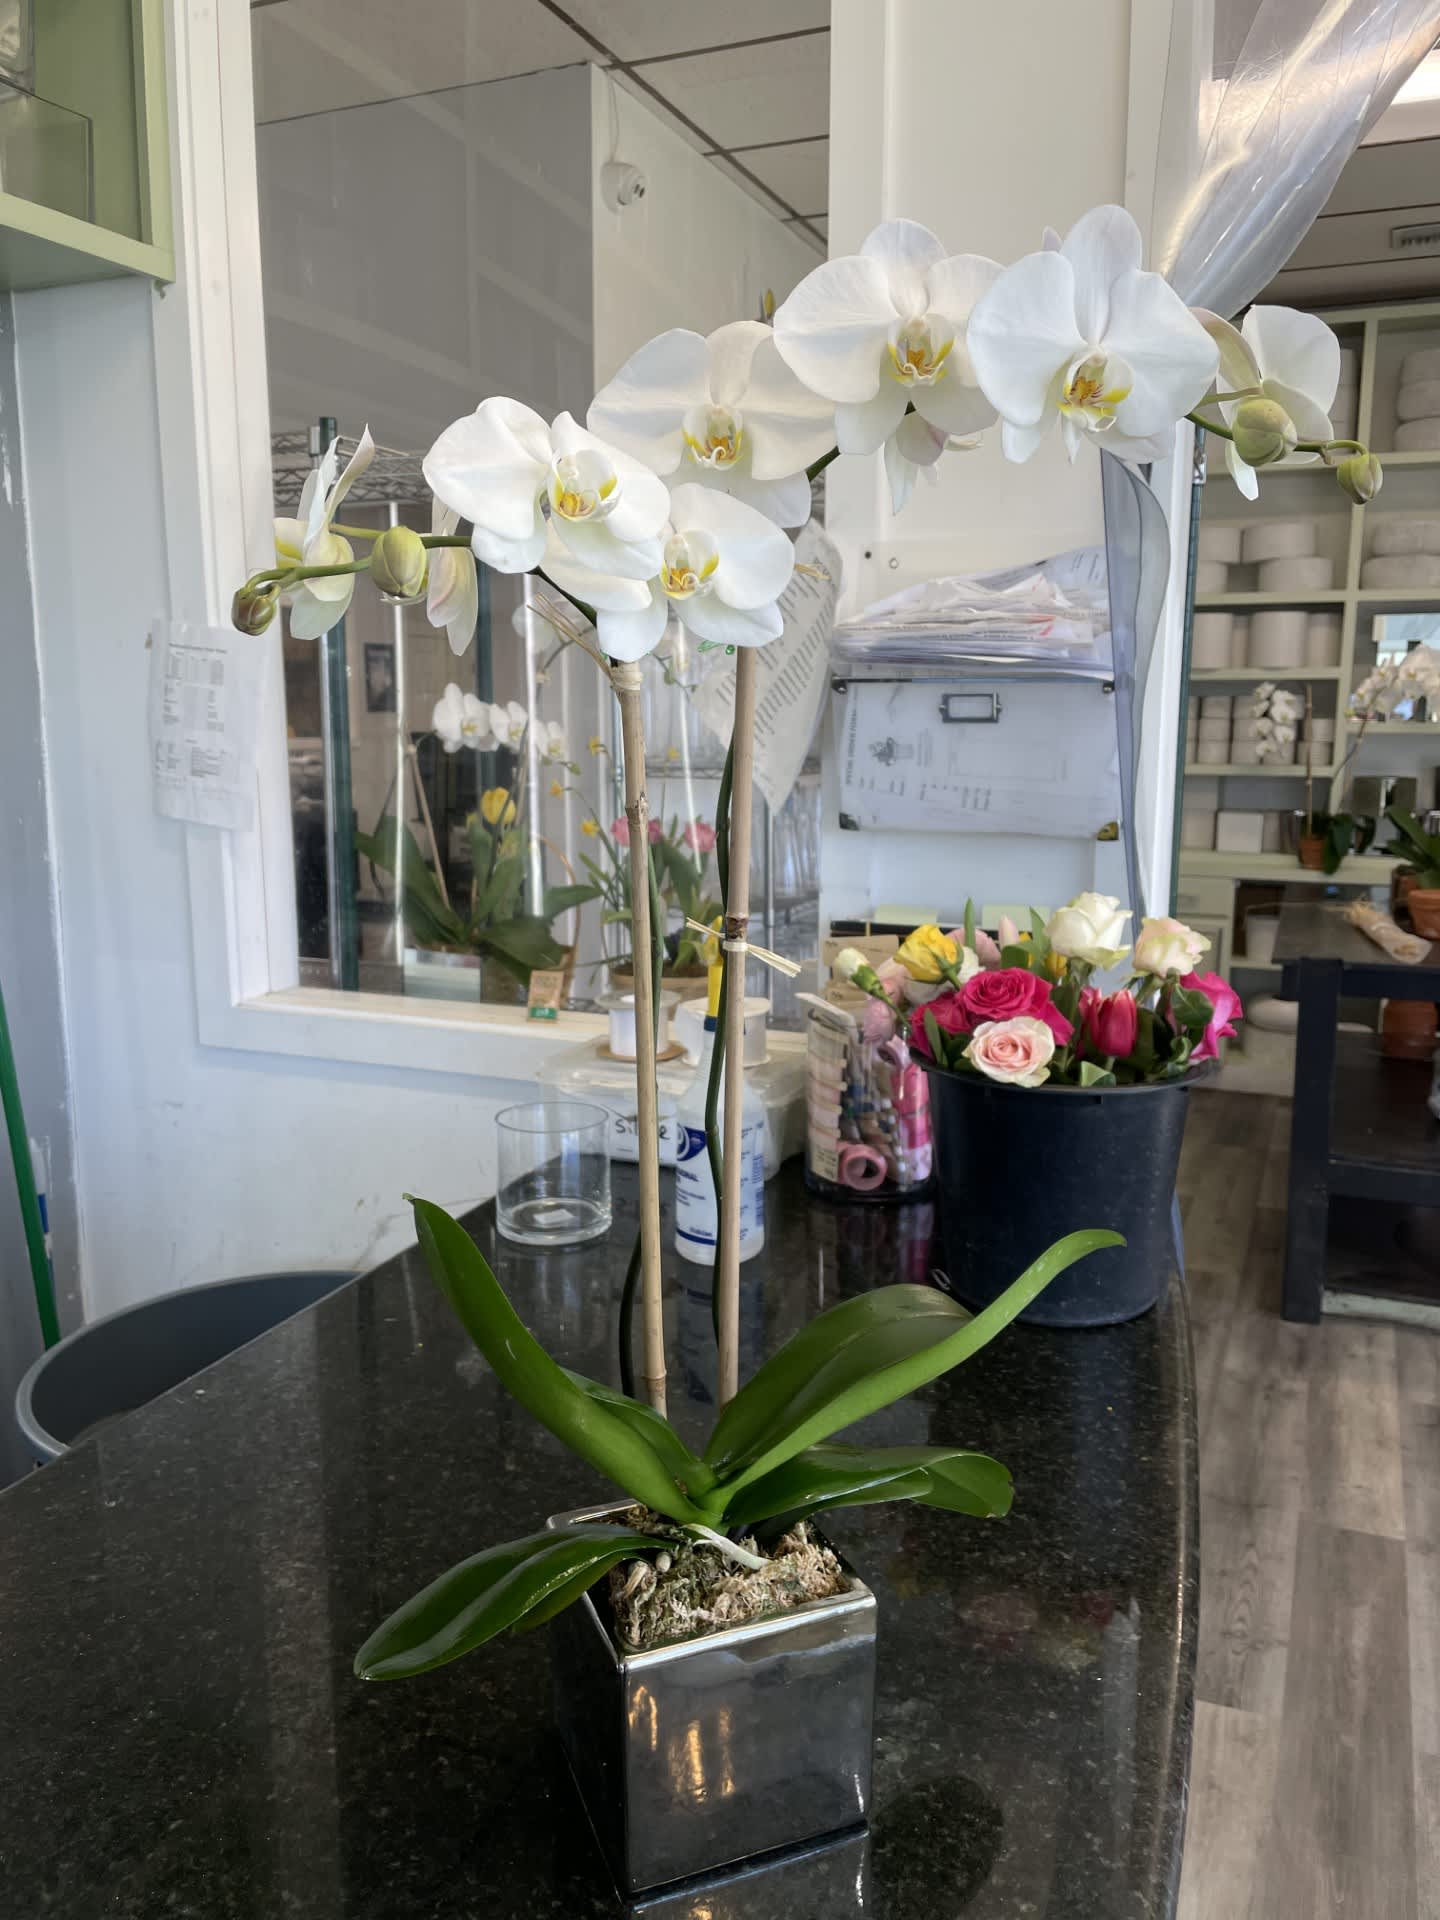 Orchid Double Stem white in Mirrored Cube - 2 Stem White Orchid arranged in 5 X 5 Mirrored Cube, with bamboo - Raffia